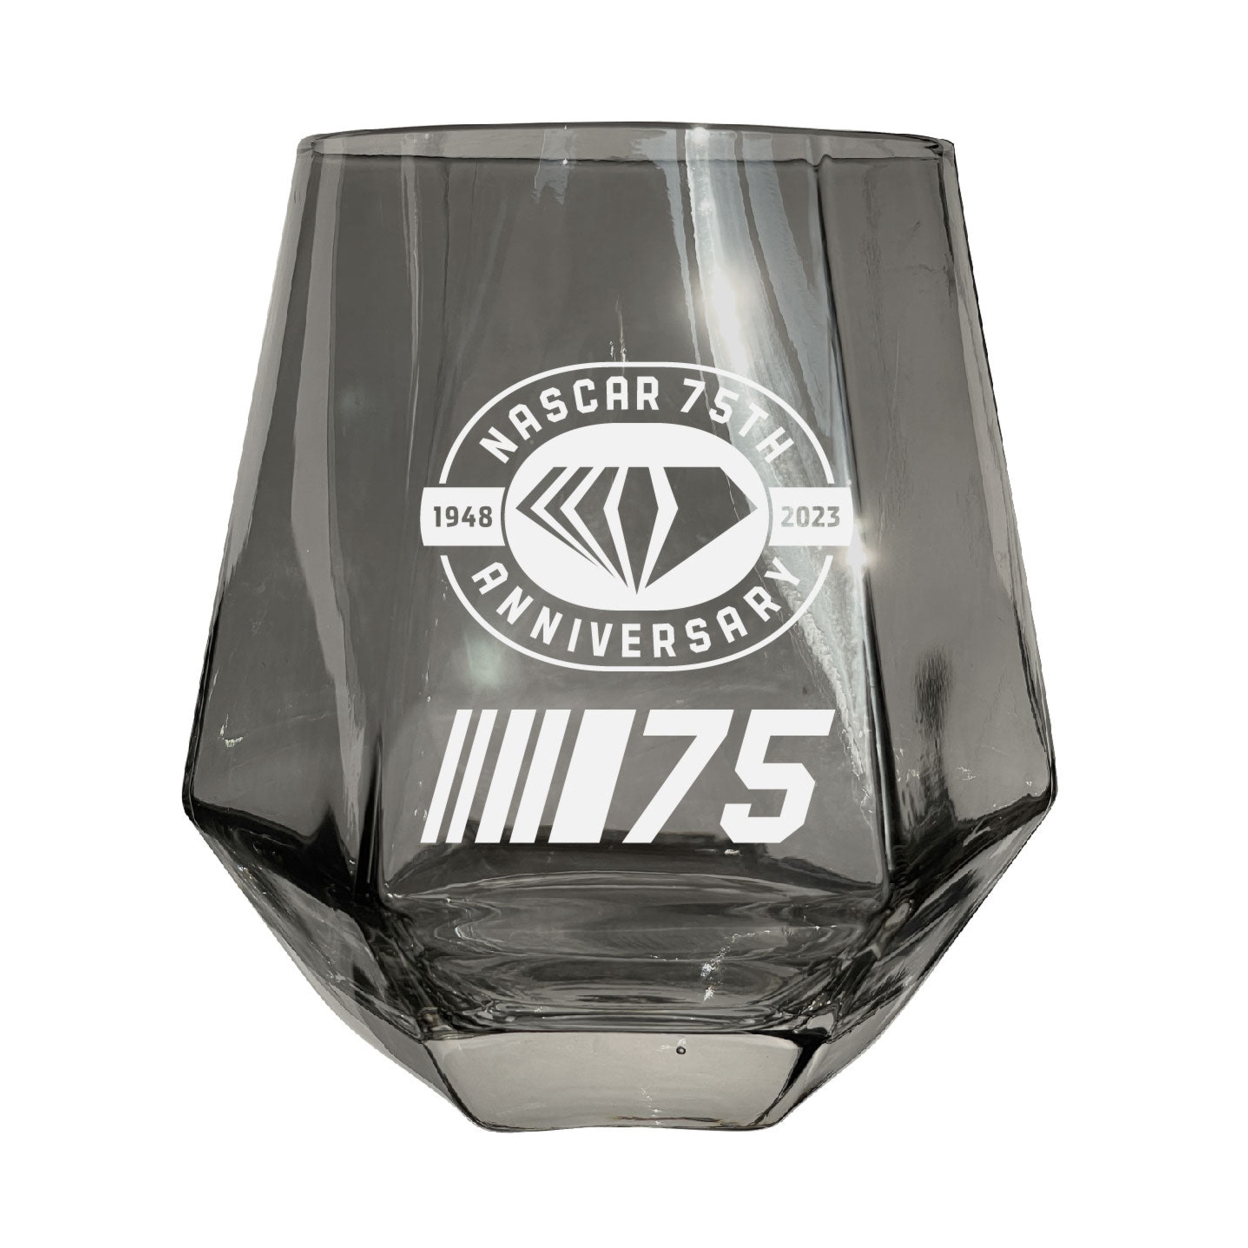 NASCAR 75 Year Anniversary Officially Licensed 10 Oz Engraved Diamond Glass - Clear, 2-Pack